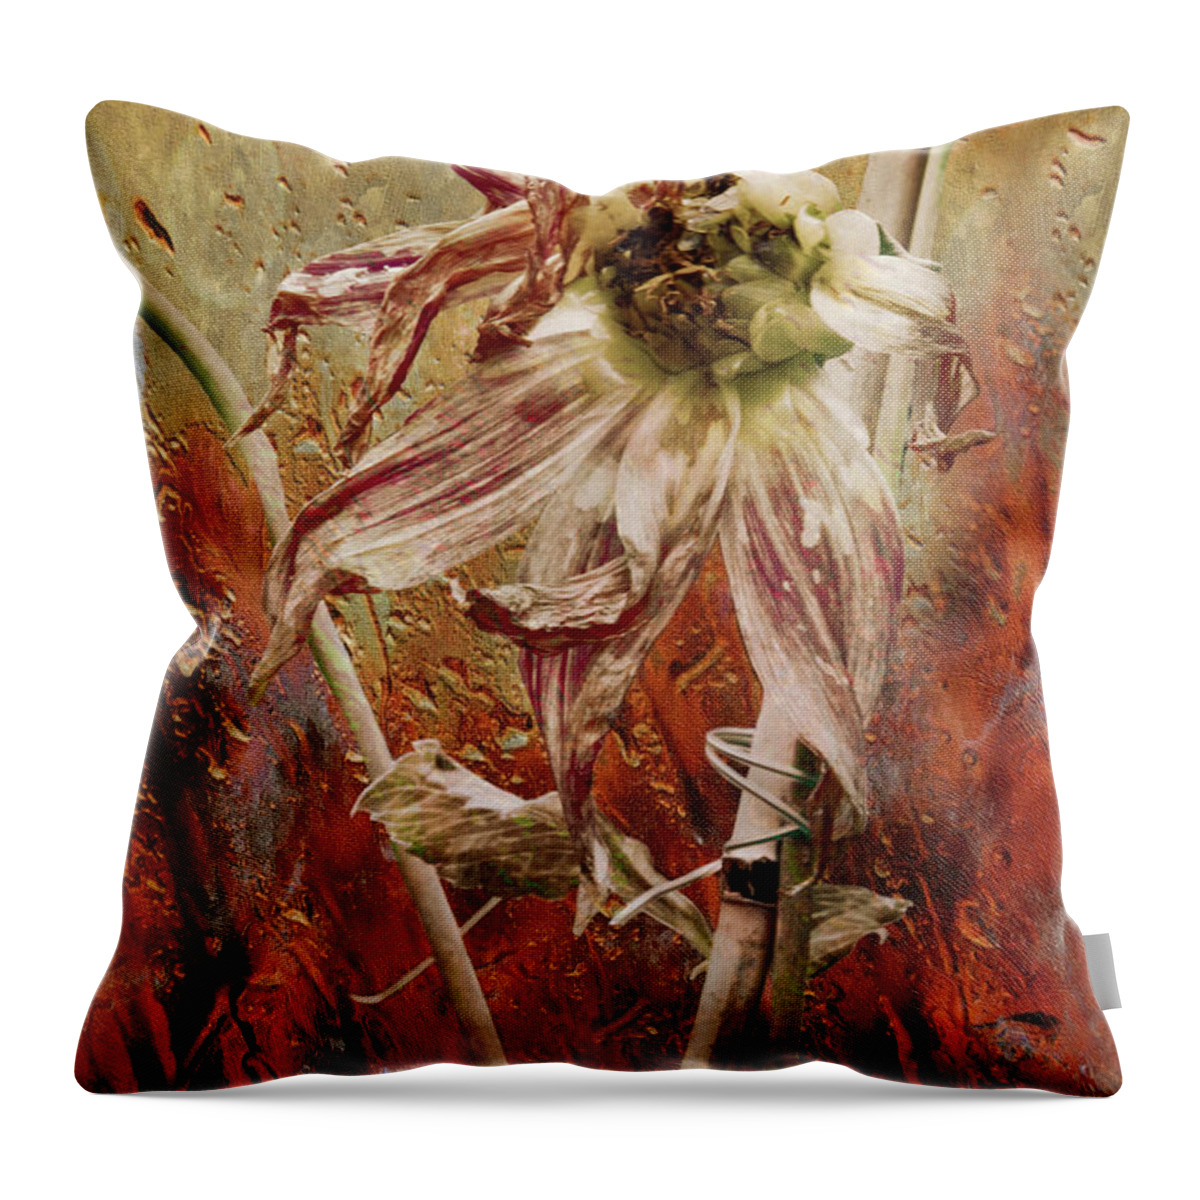 Dahlia Throw Pillow featuring the photograph Given Natures by Cynthia Dickinson